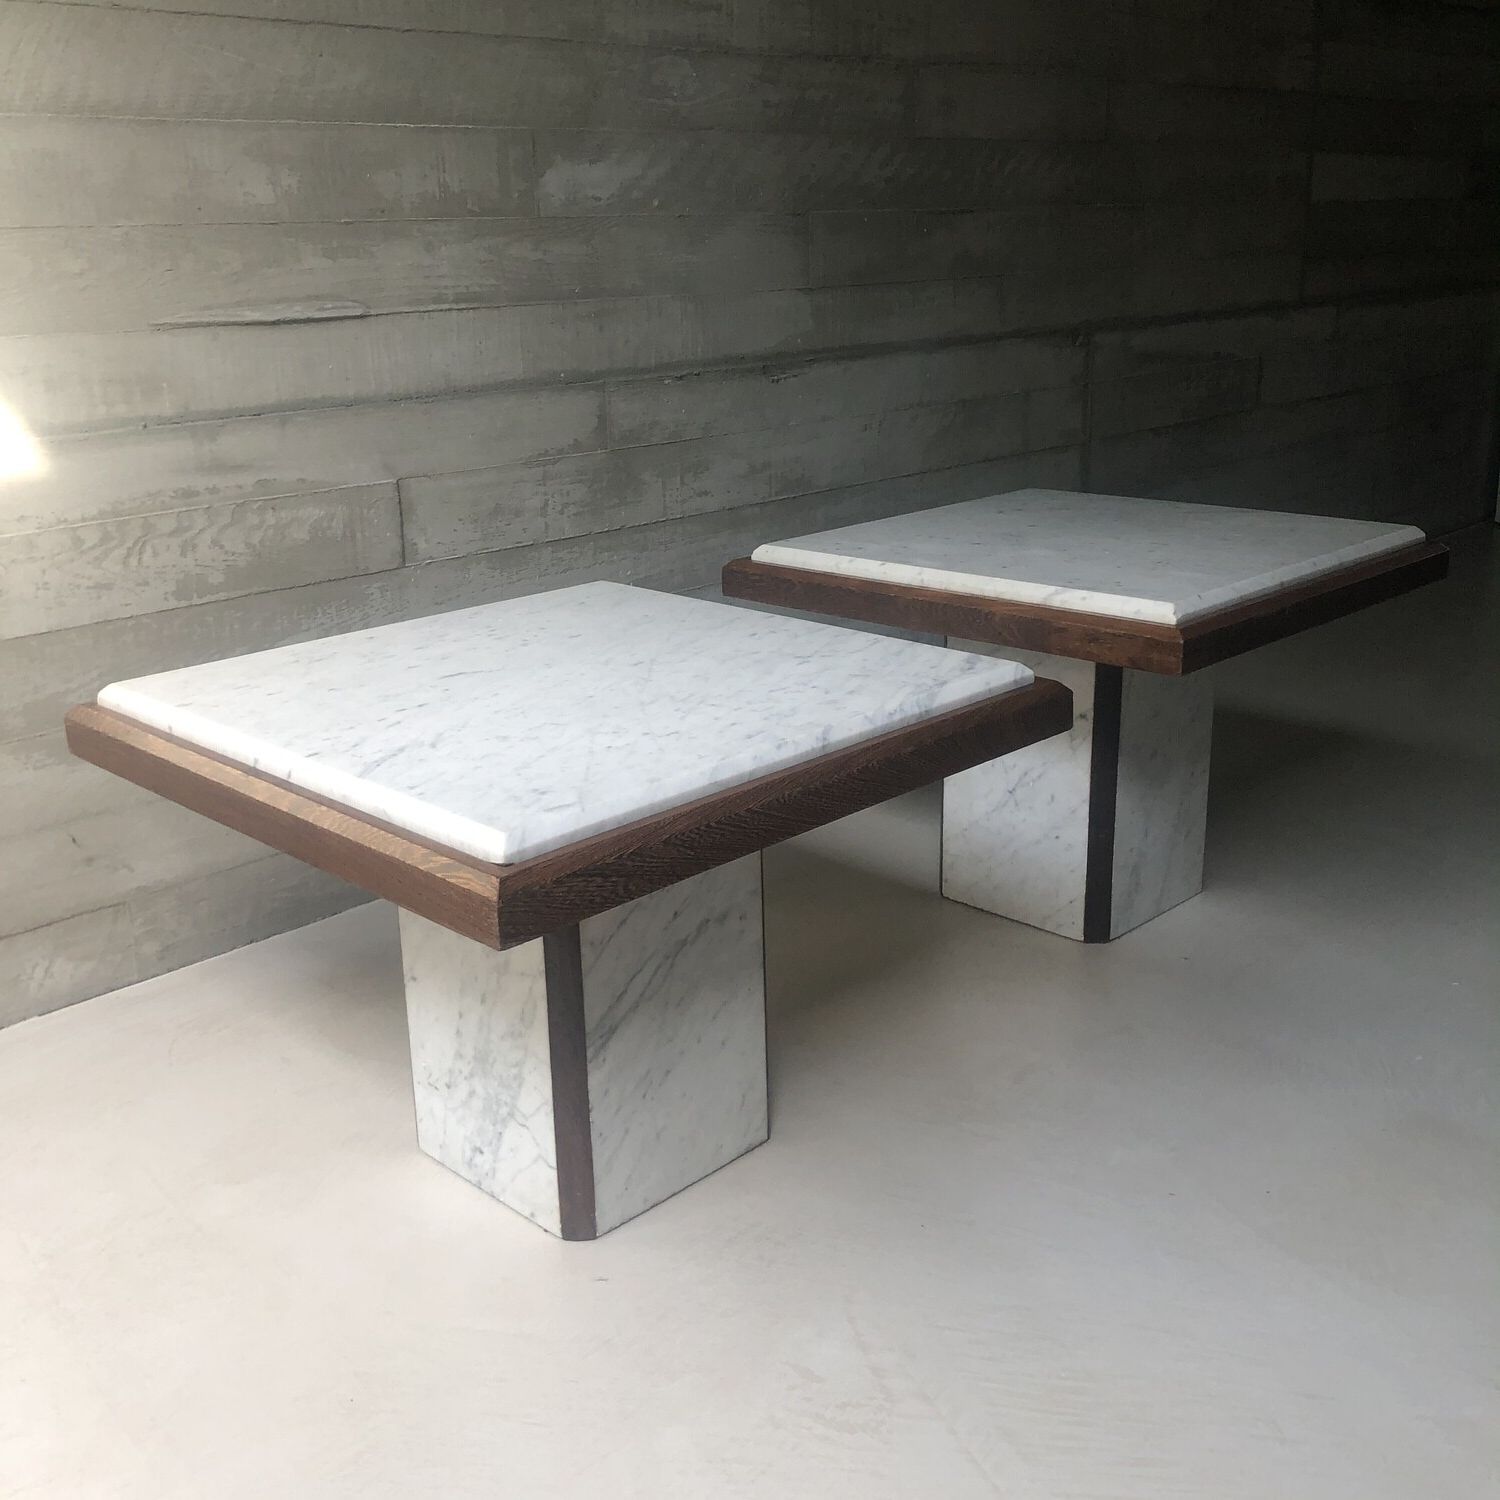 Set Of Two Marble And Wood Coffee Tables Pertaining To Preferred Marble Coffee Tables Set Of 2 (Gallery 1 of 20)